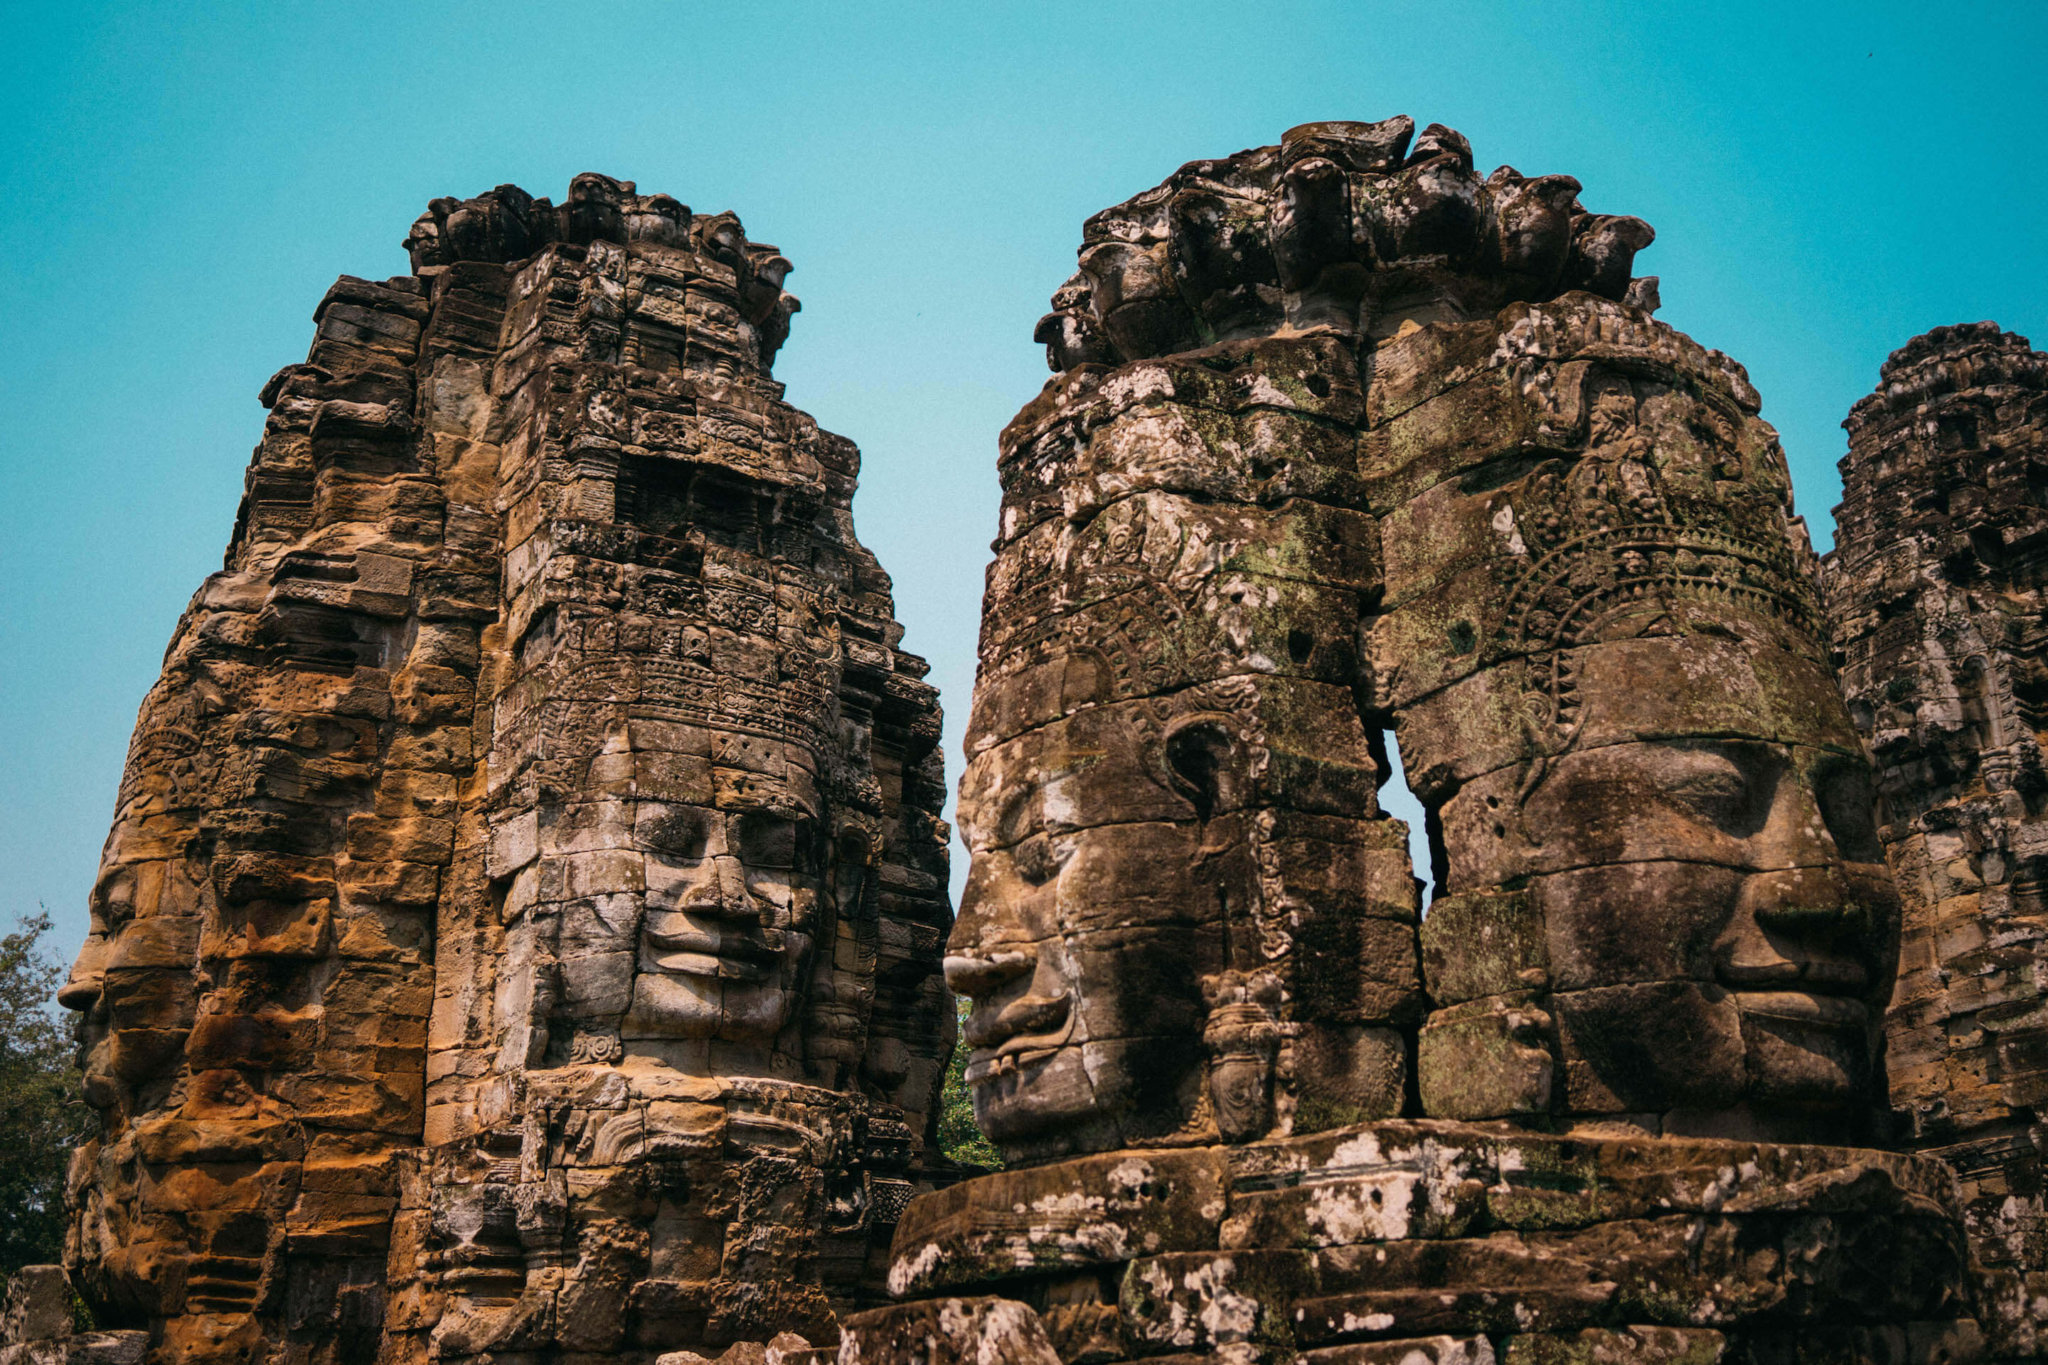 Siem Reap, Angkor Wat, What to do in Siem Reap, Siem Reap Guide, Cambodia, Best Photos of Angkor Wat, Angkor Wat in a day, Wanderluluu, Bayon Temple, Temple with the faces Angkor Wat, Angkor Thom, Angkor Thom South Gate